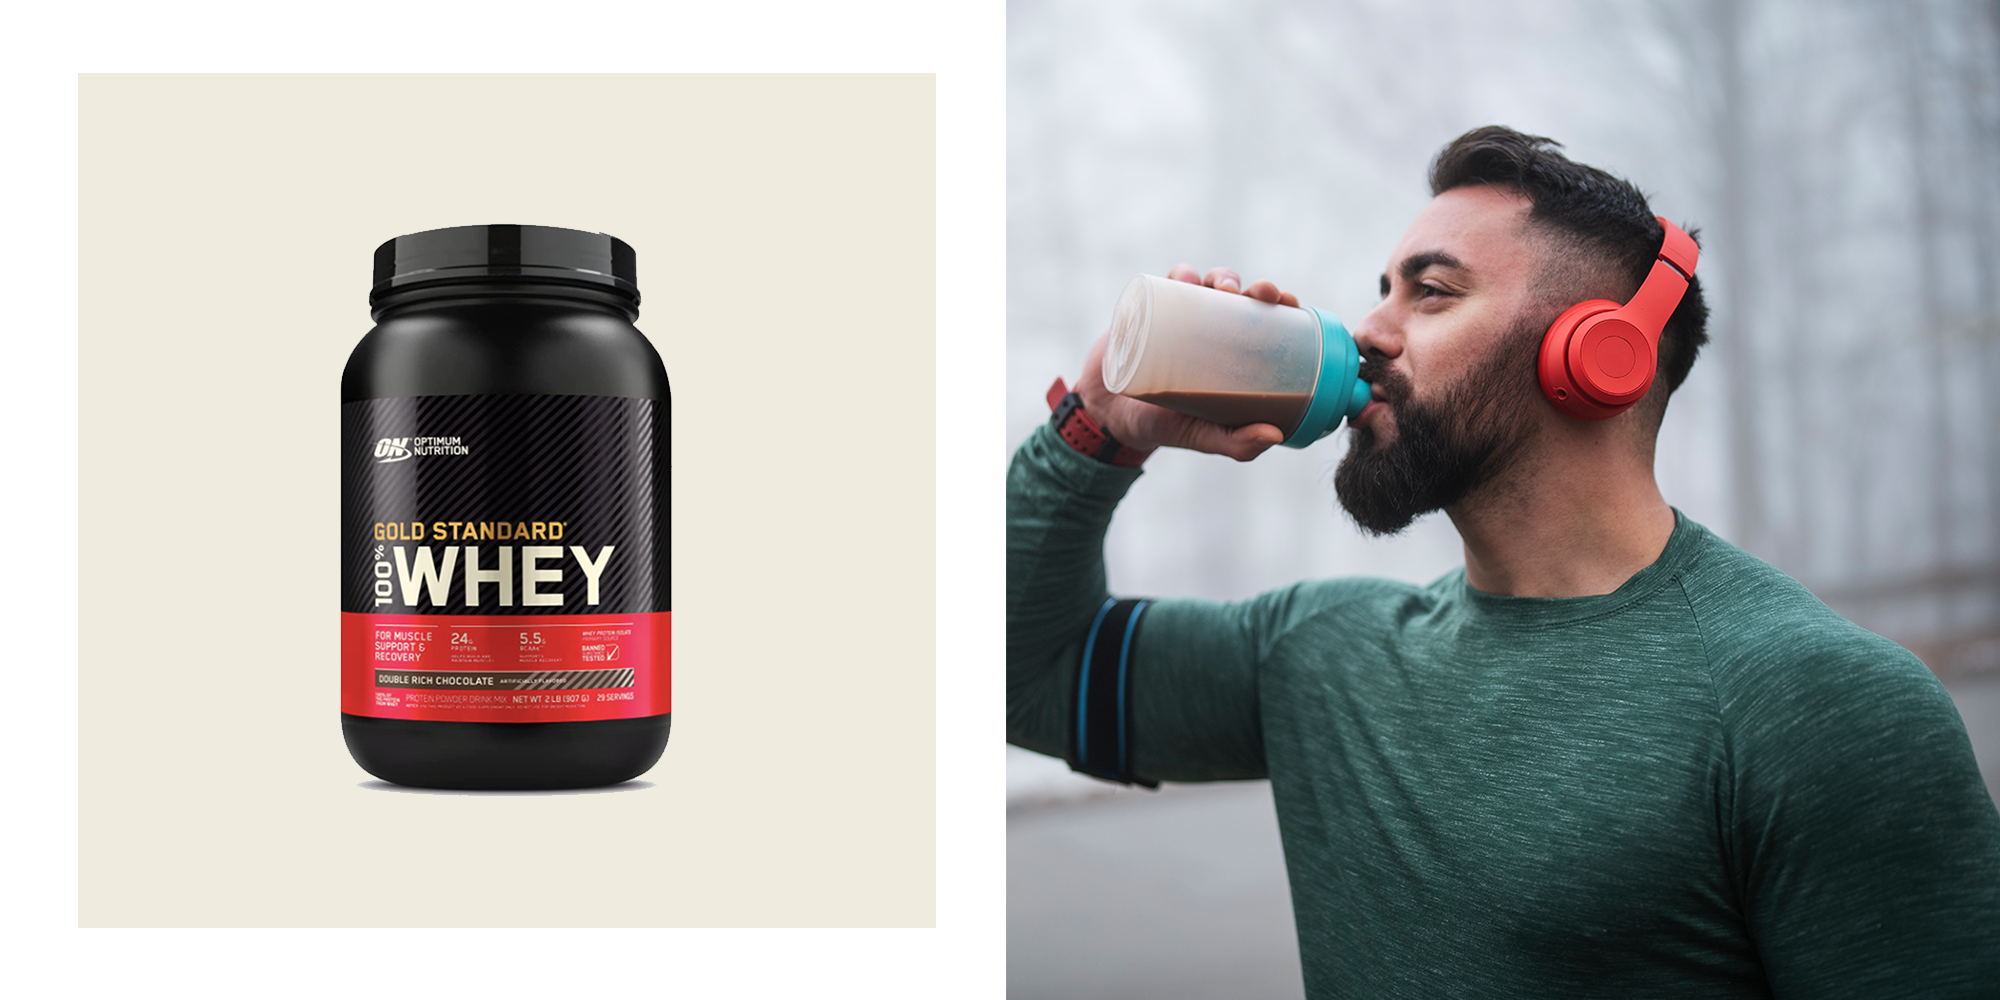 Are All Whey Proteins The Same? No WHEY!